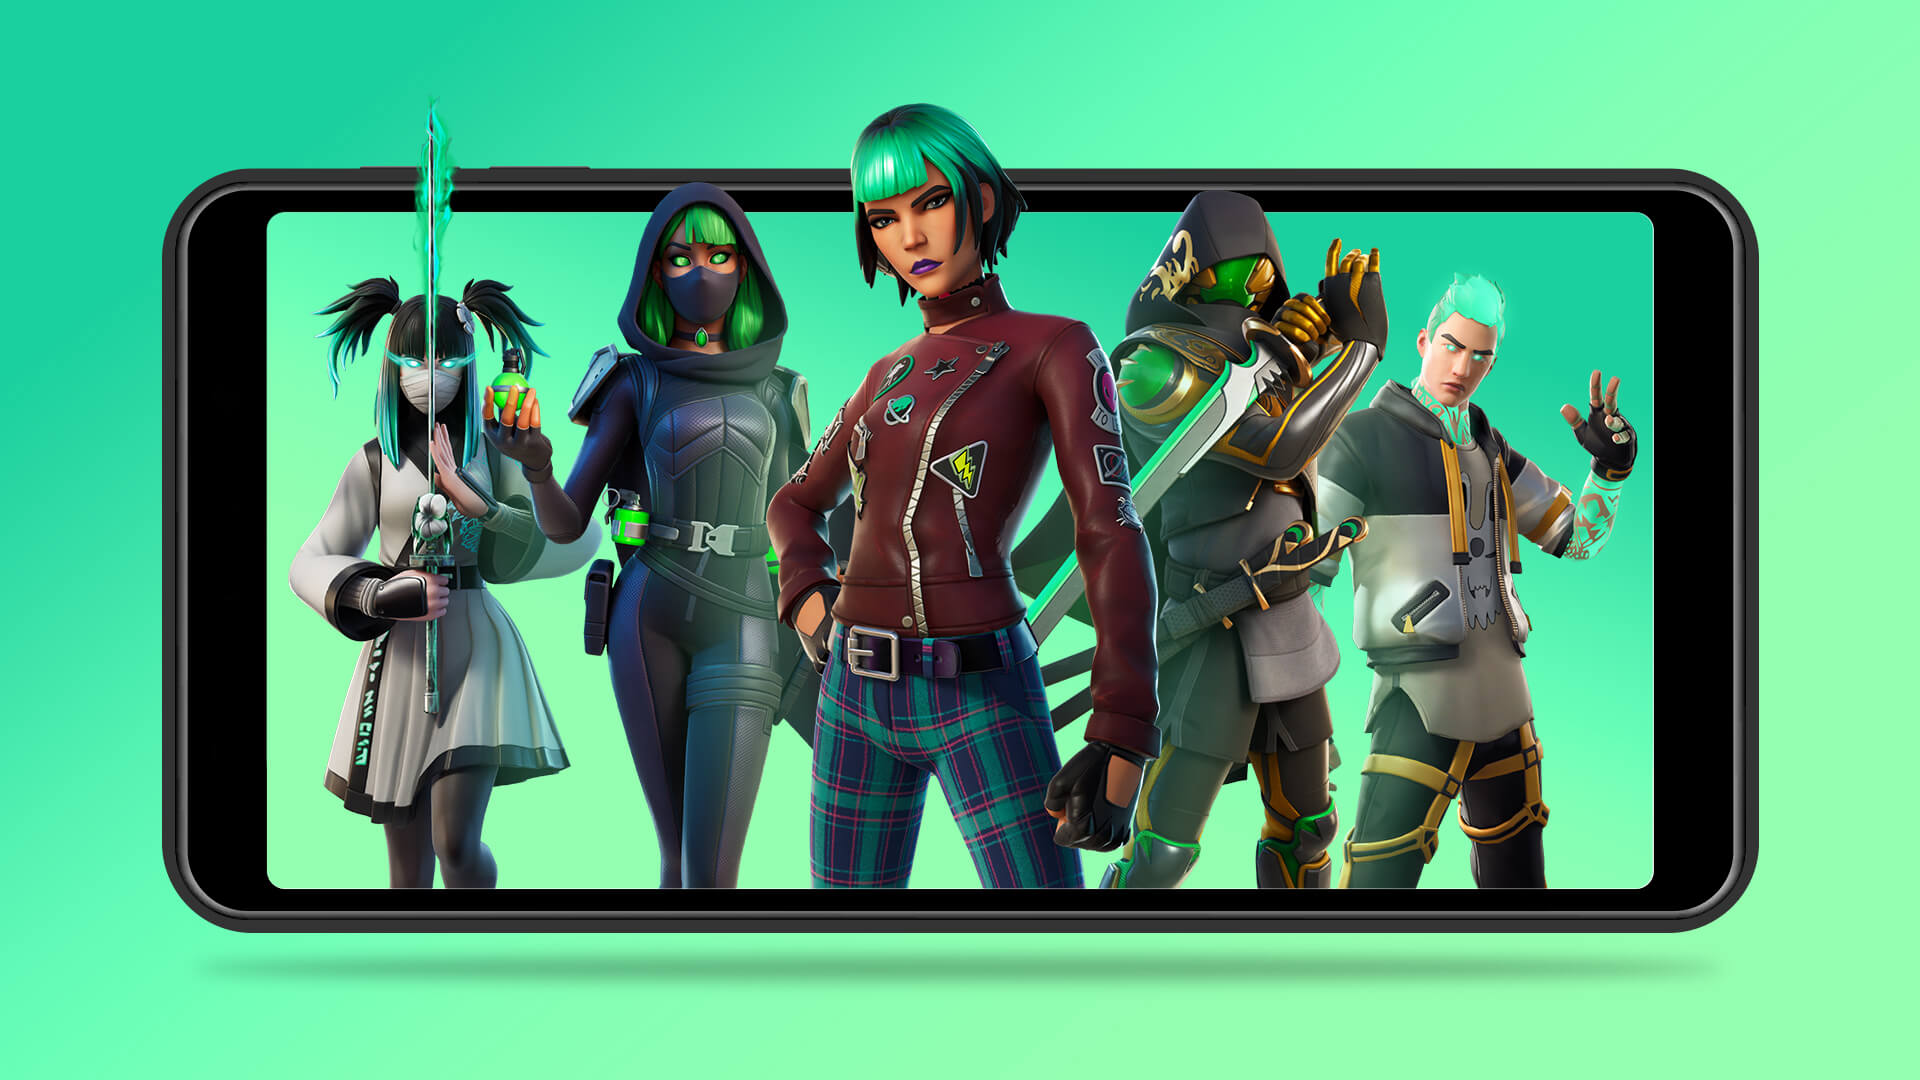 Epic says Fortnite for iPhone will hit Europe “in the next couple of months”